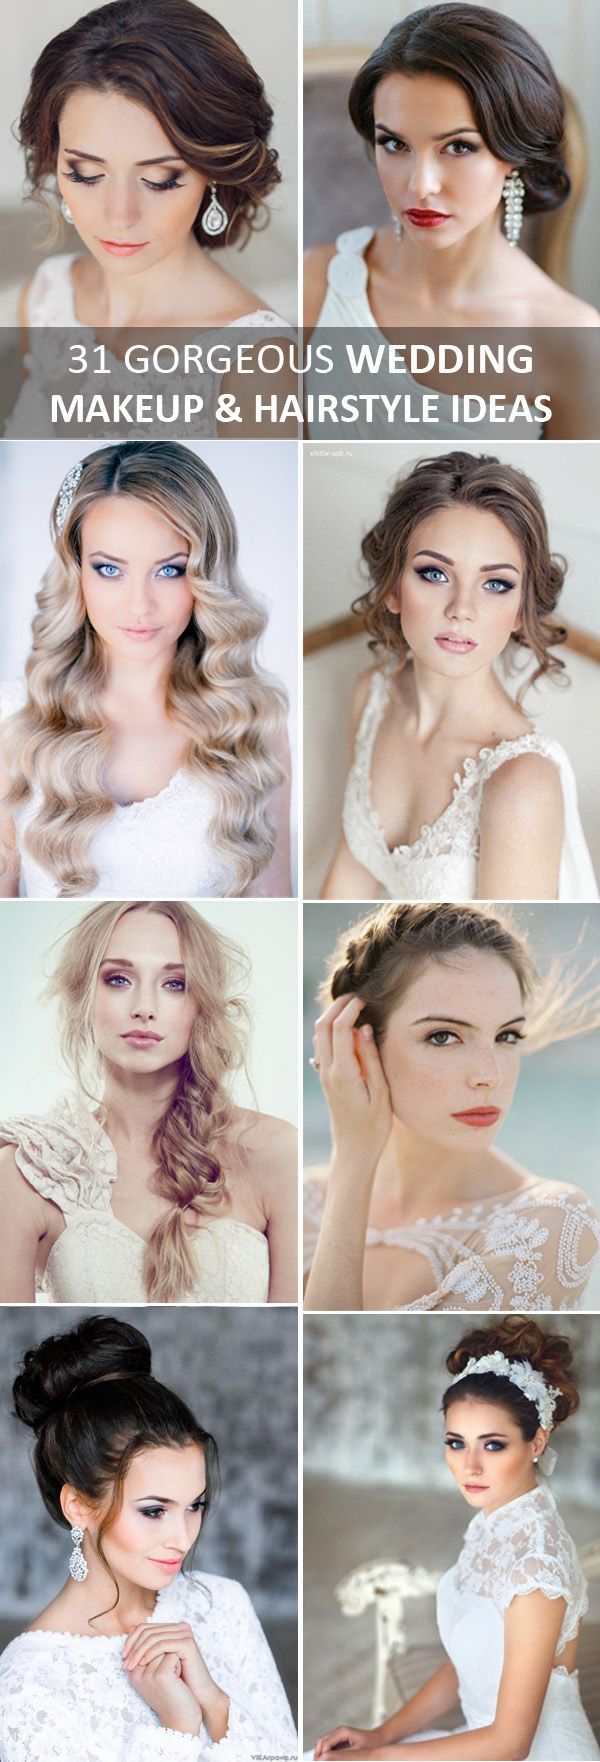 31 perfect wedding makeup and hairstyle ideas for every bride